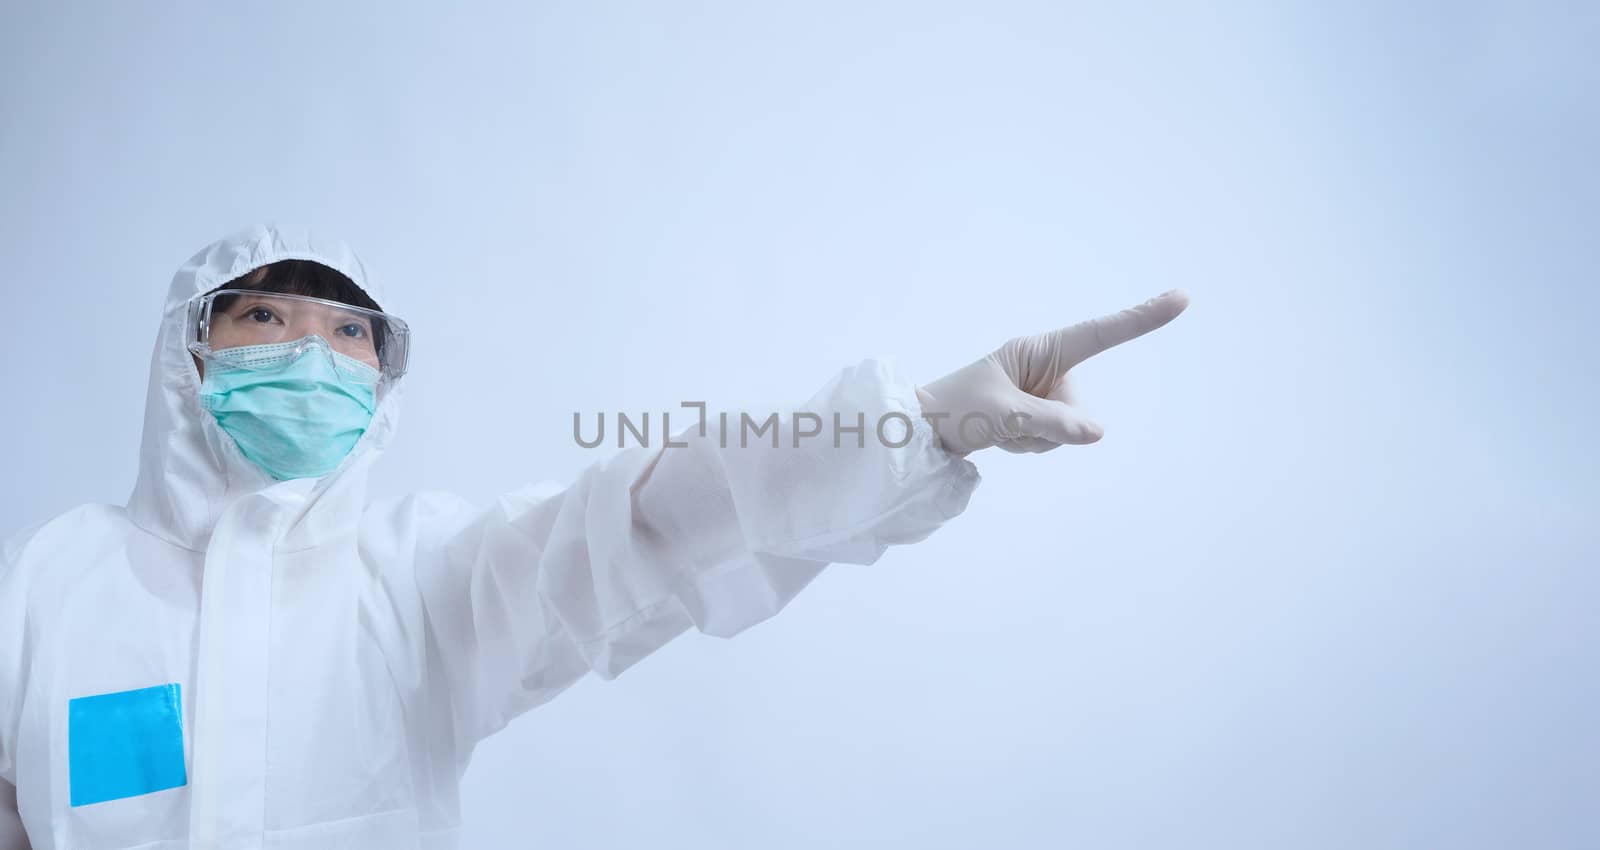 Asia woman doctor in PPE suit or Personal Protective Equipment uniform and wearing medical face mask, rubber gloves and goggles for protect coronavirus pandemic. Studio shot with copy space.